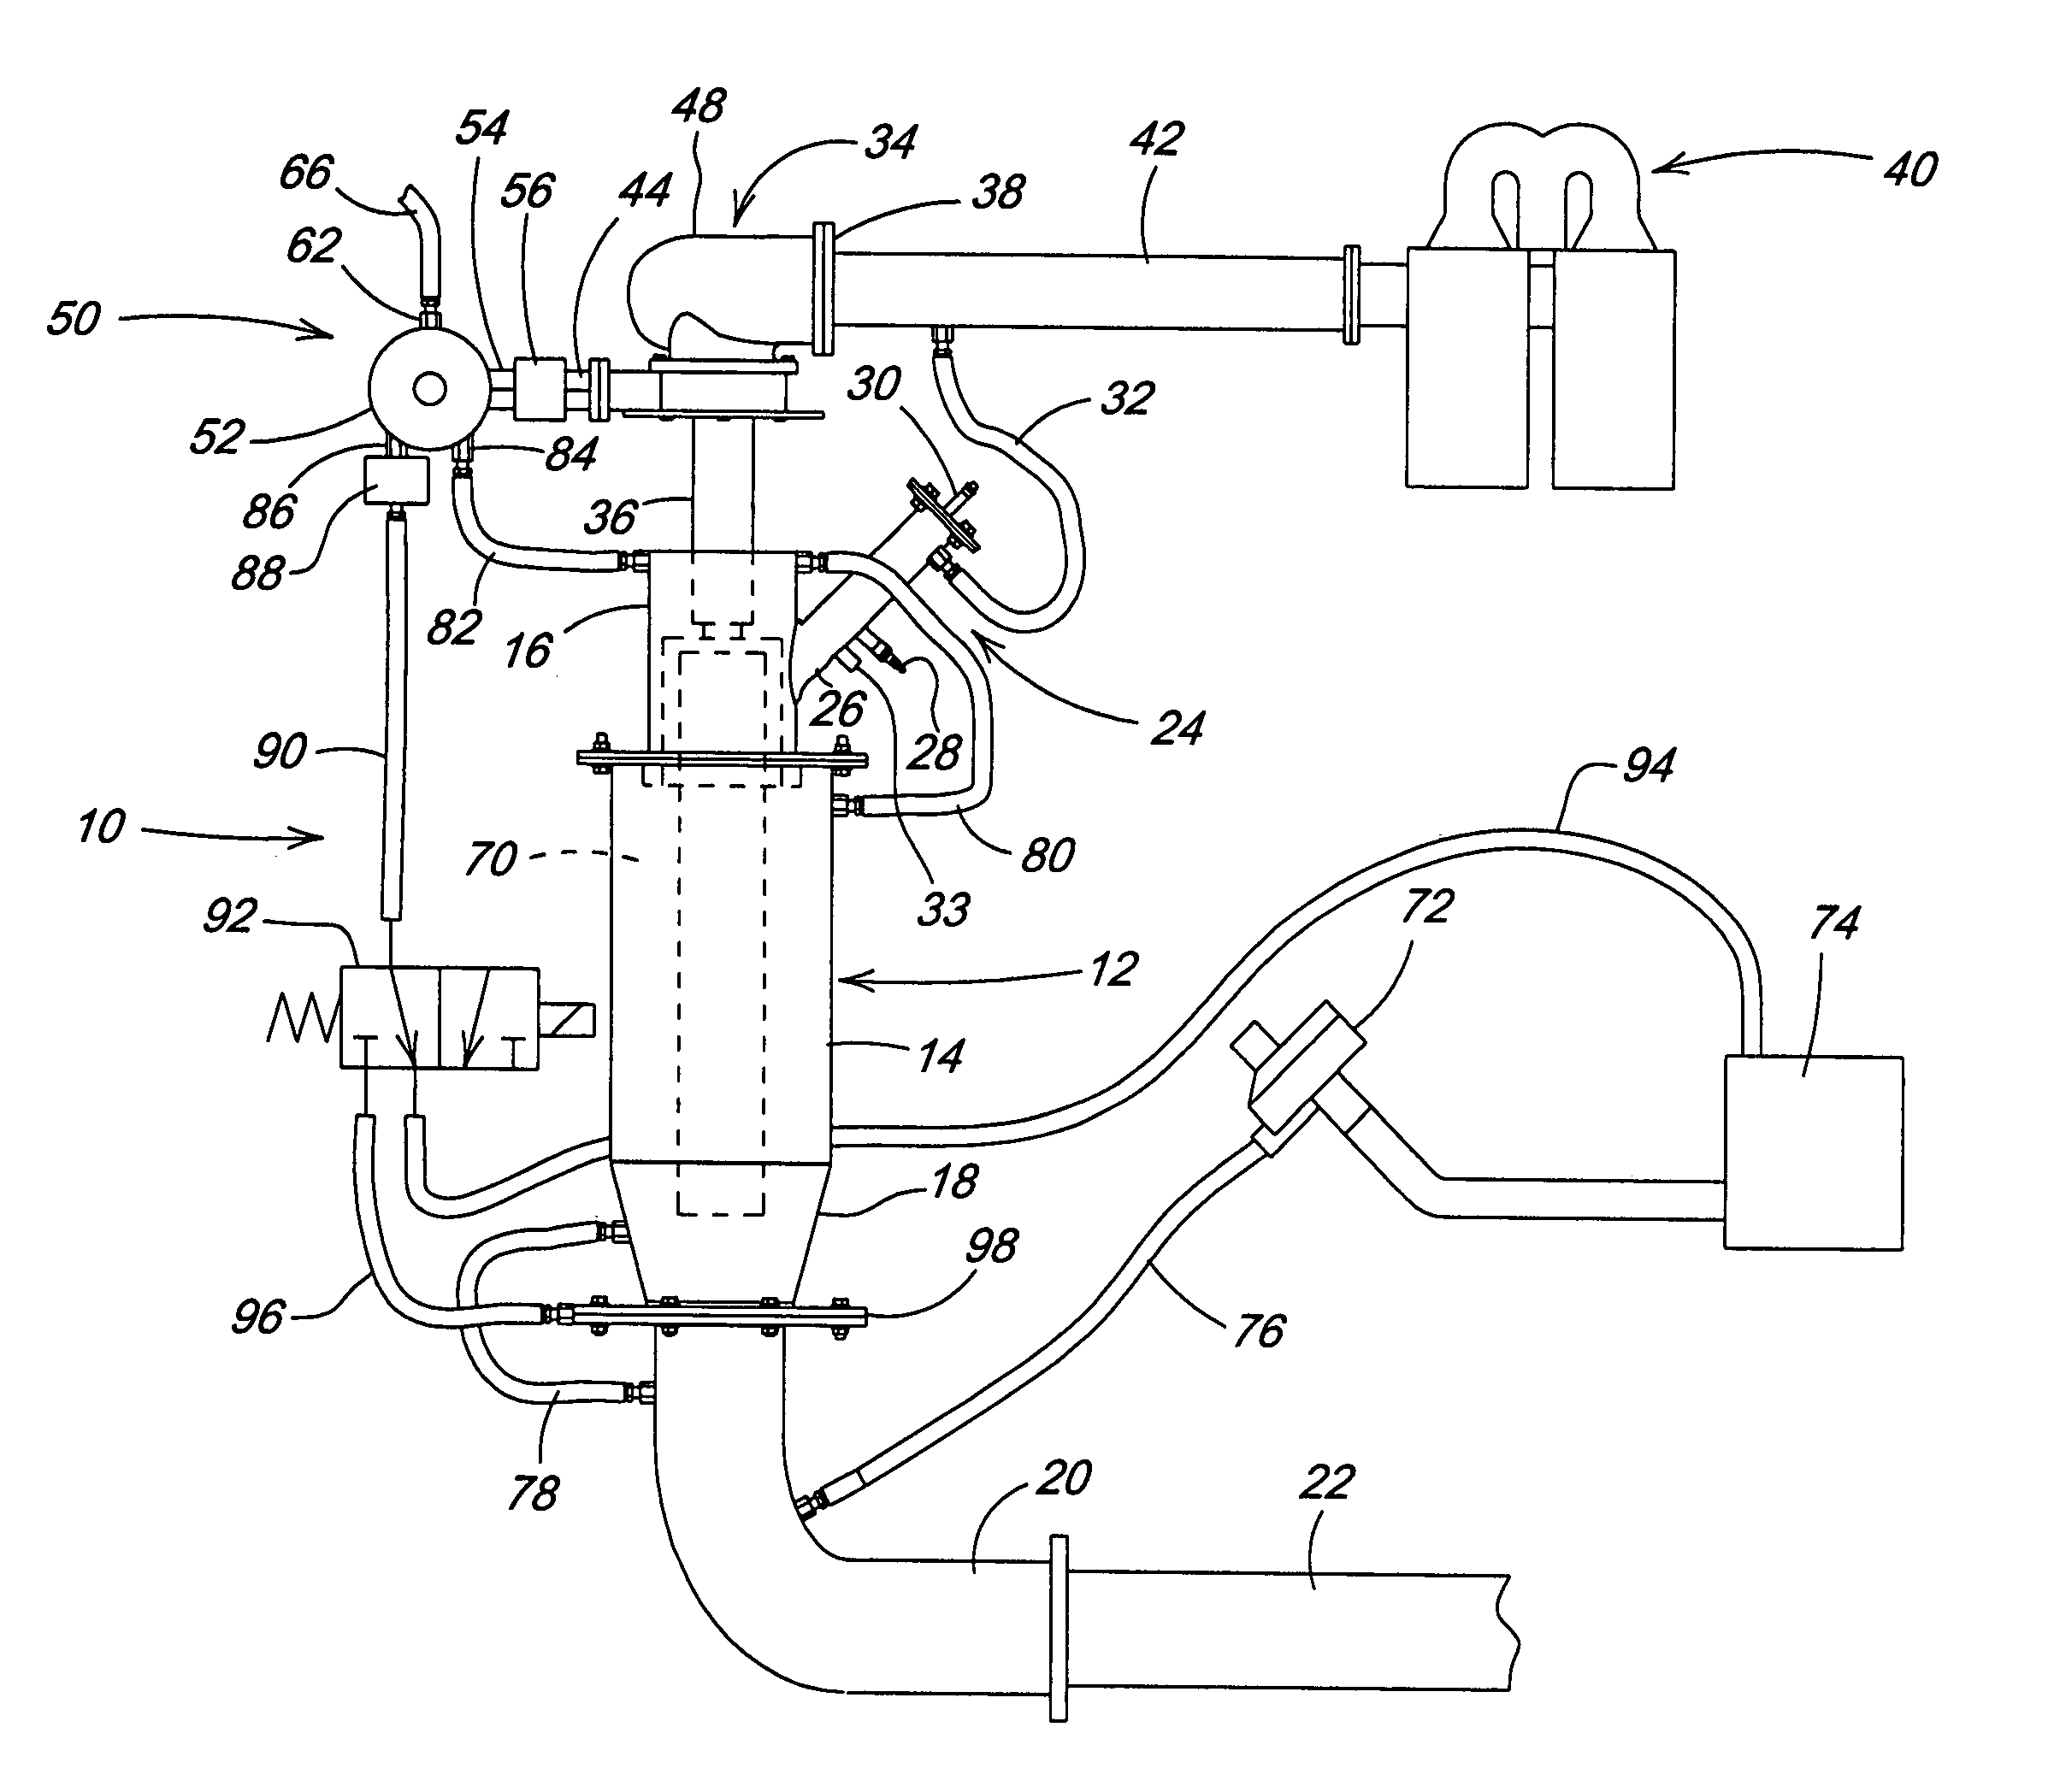 Crop re-hydration system utilizing a direct-fired steam generator having continuous water circulation